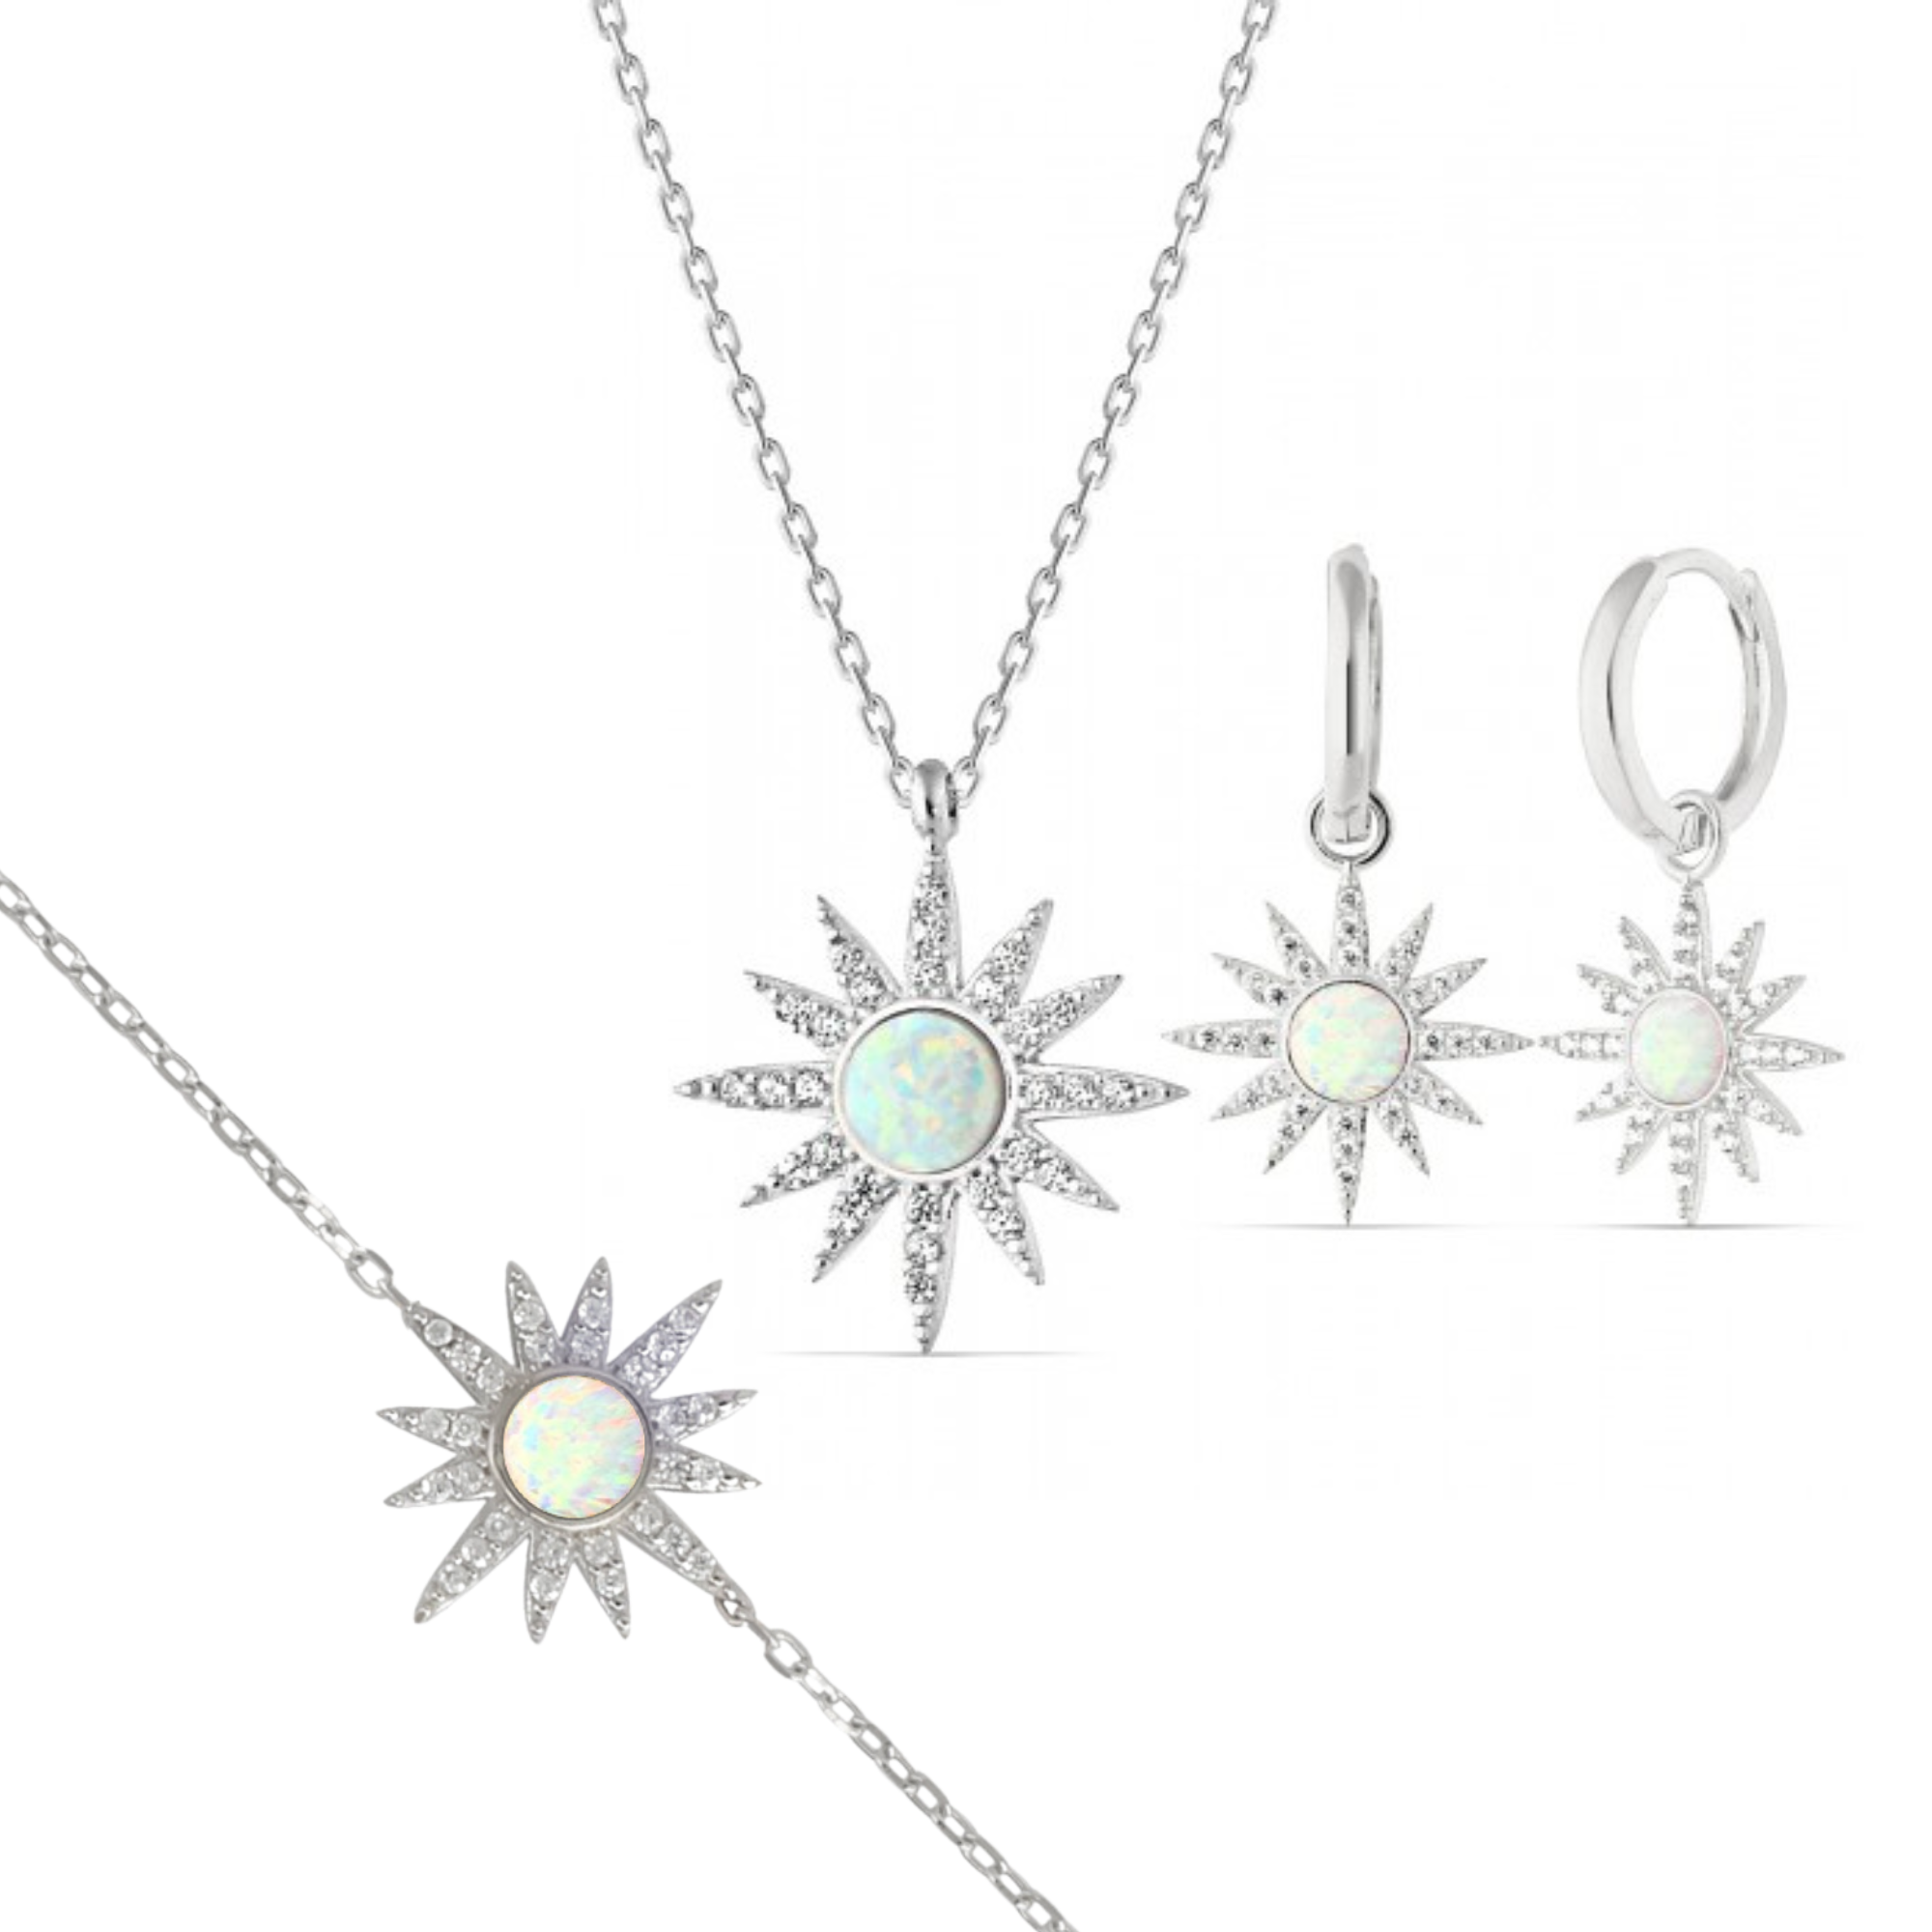 White Opal Sun Sterling Silver Necklace Earring and Bracelet Set